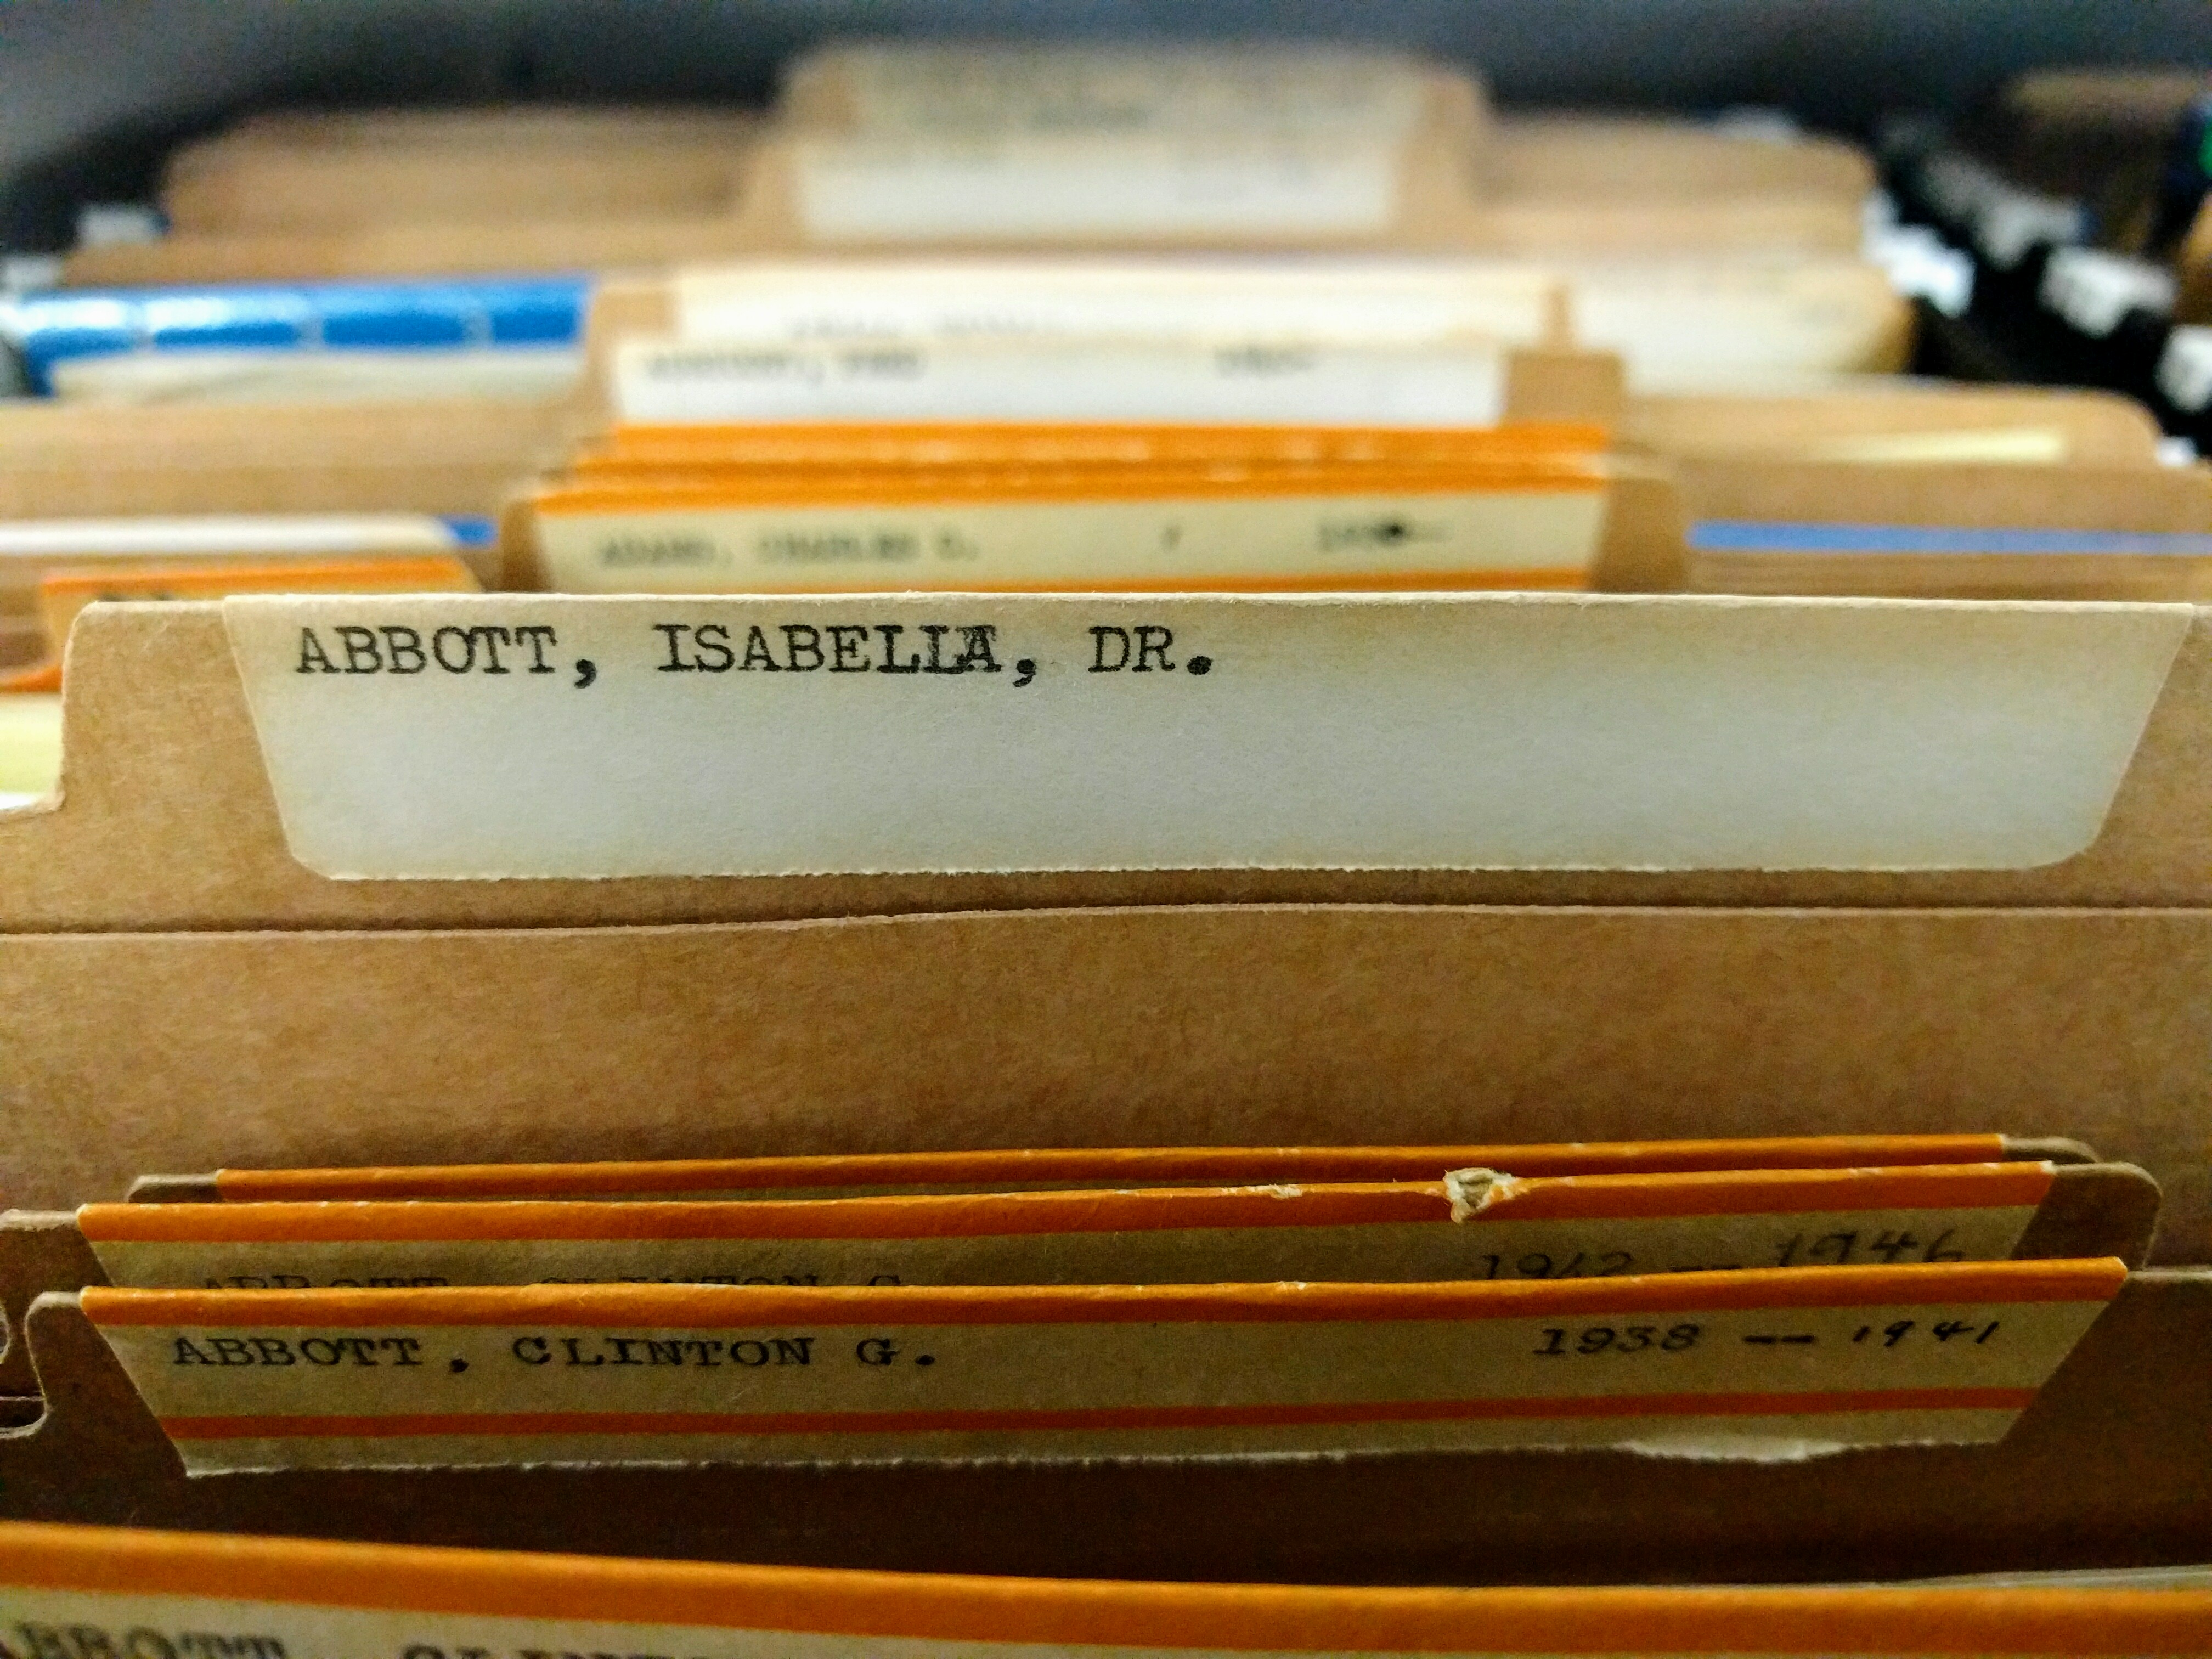 Dr. Isabella Abbott's correspondence file in the archives.